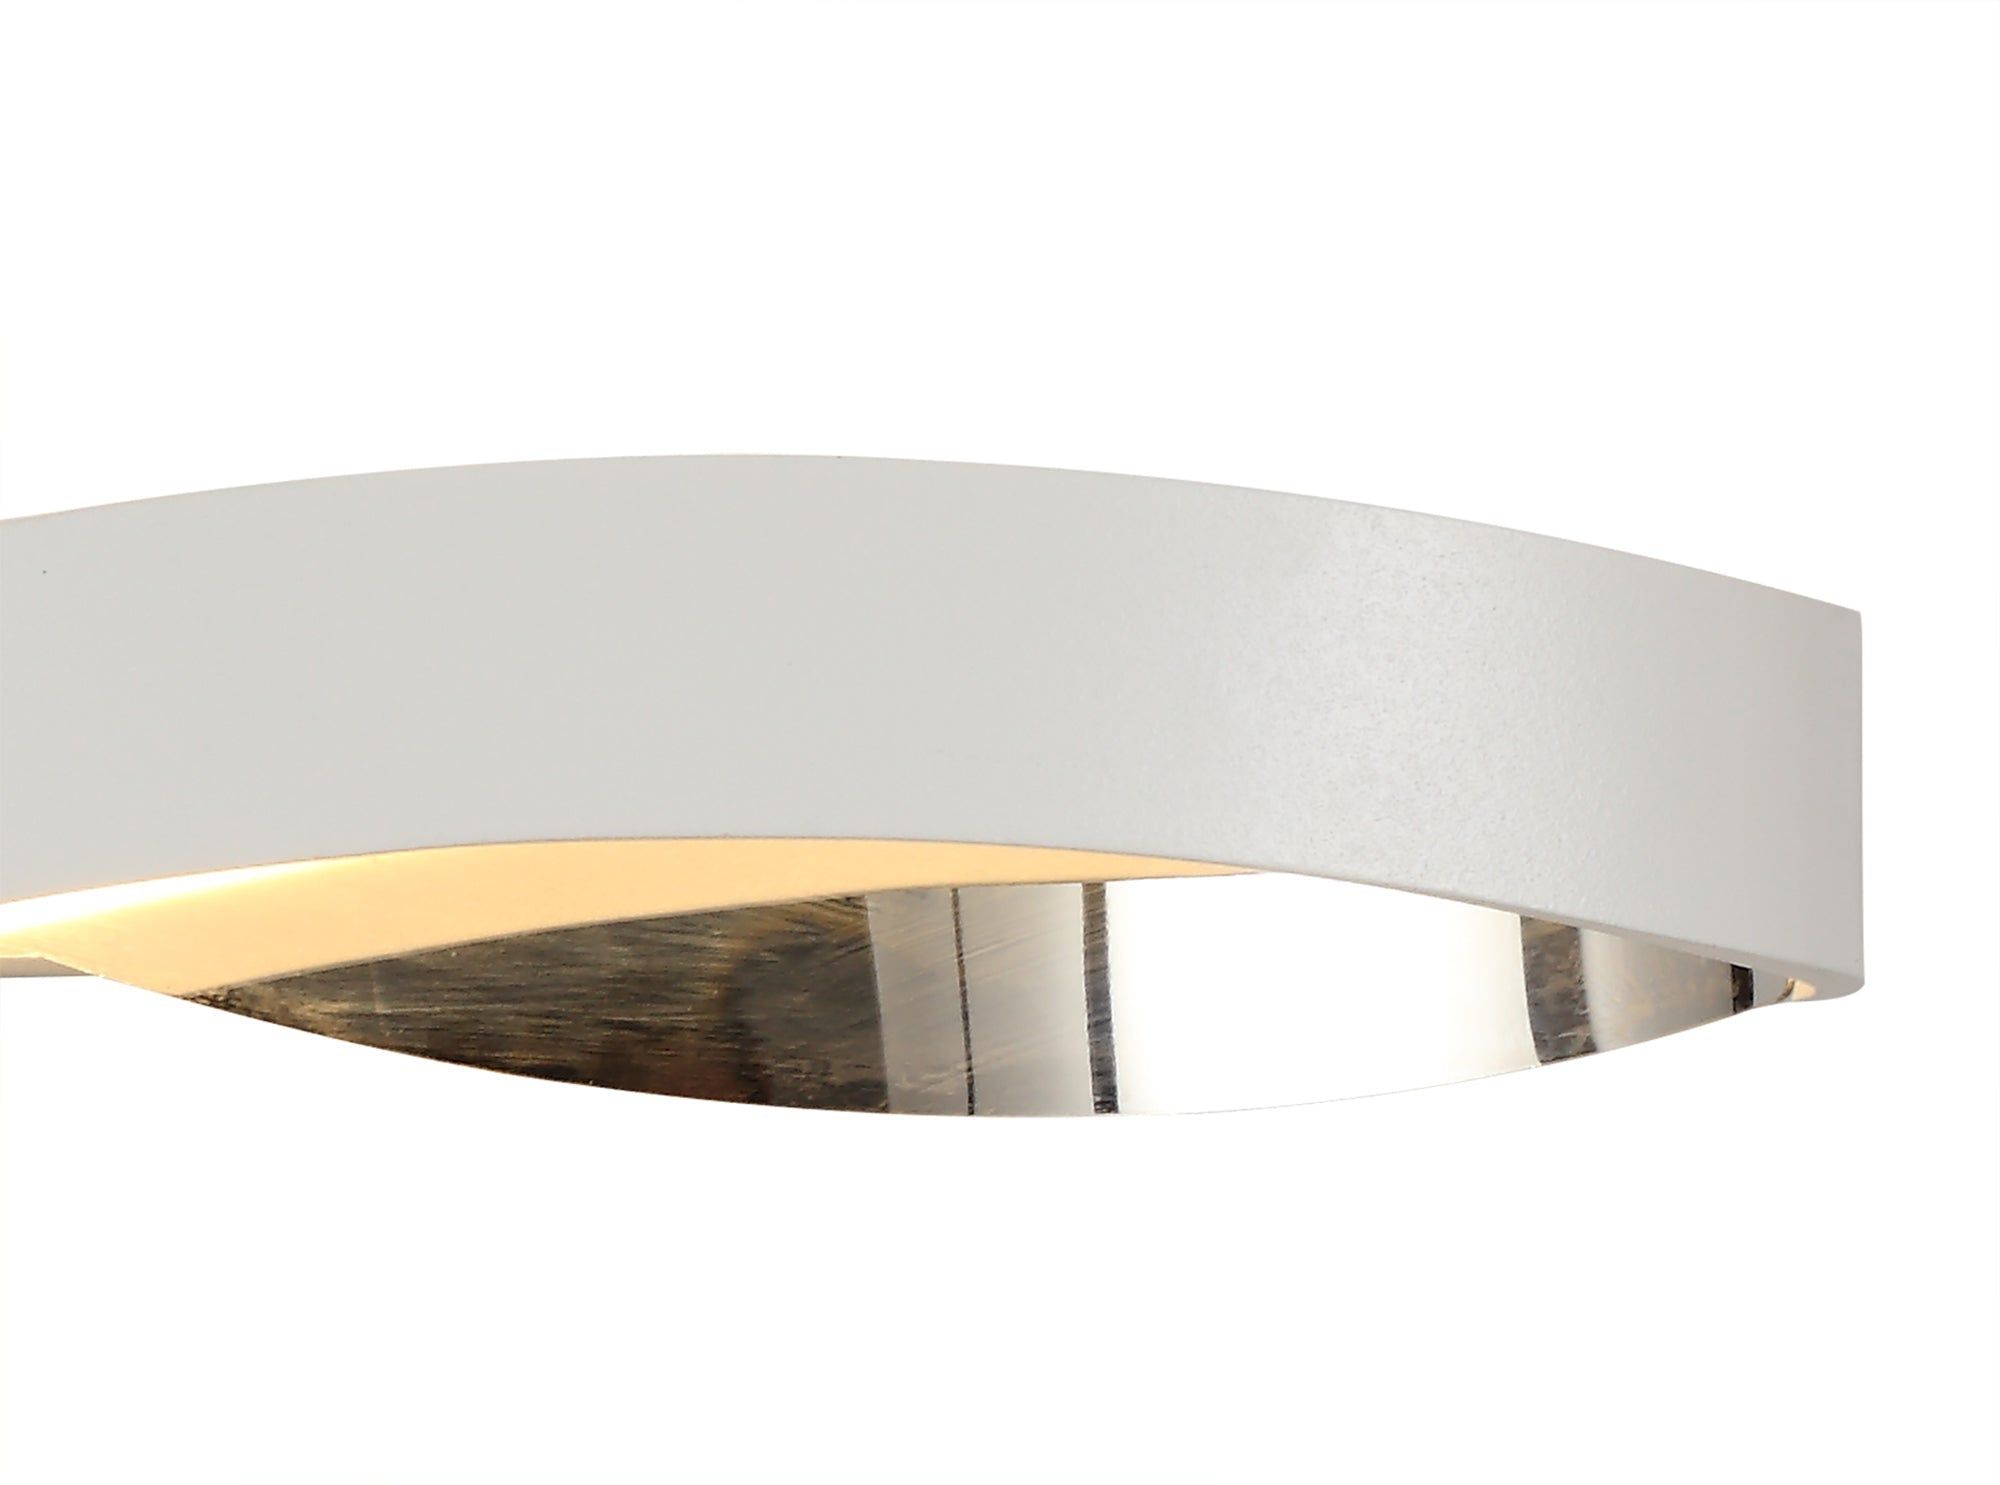 Realm Wall Lamp, 1 x 6W LED, 3000K, 420lm, Sand Anthracite/Satin Nickel, Sand White/Polished Chrome, 3yrs Warranty